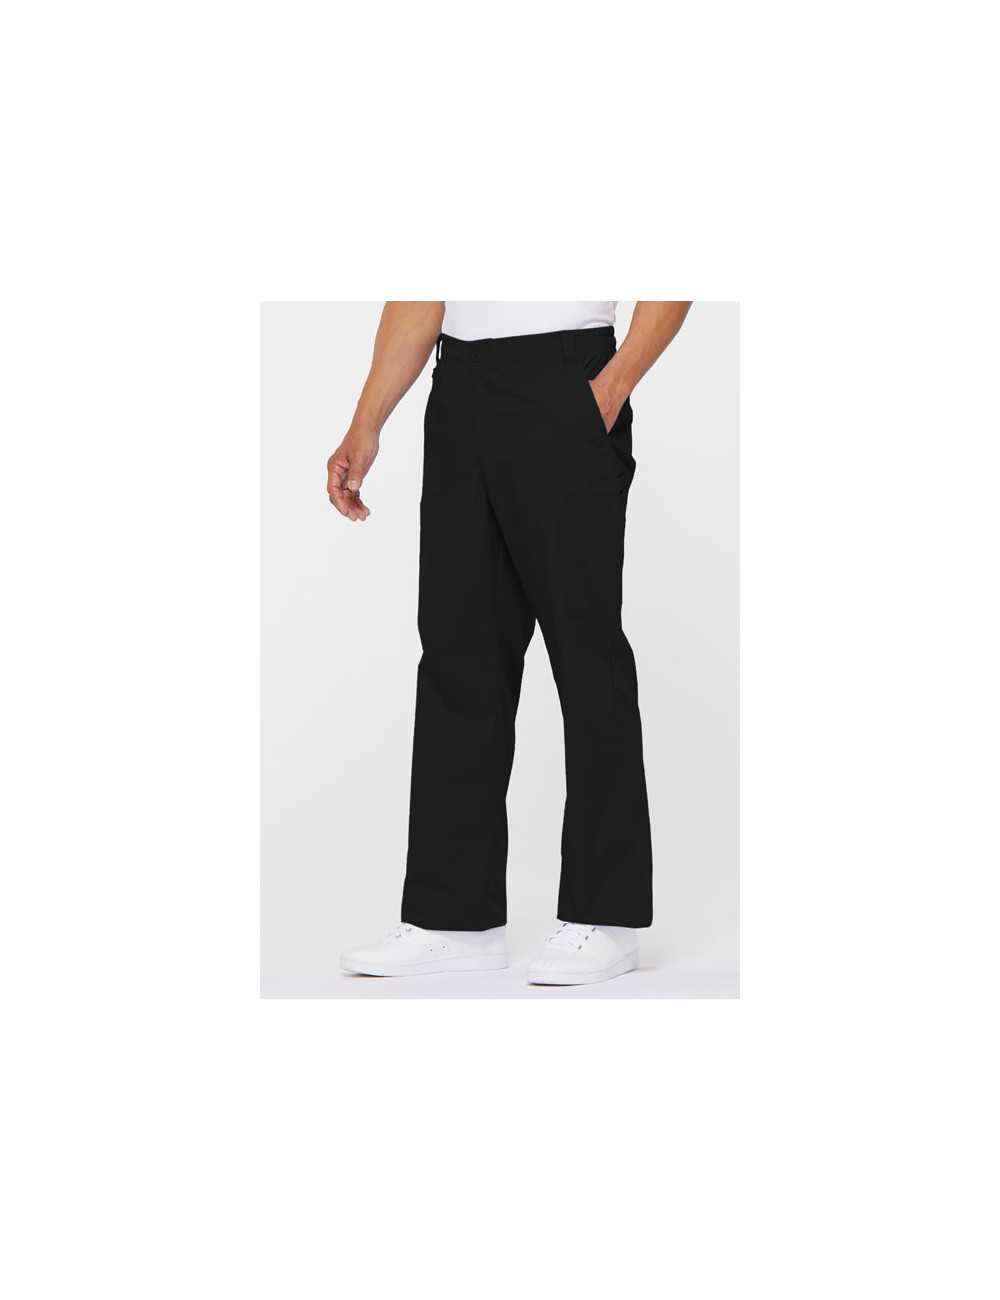 Amazon.com: Nike HyperShield Men's Golf Trousers Pants CK6066-222 Olive (M)  : Clothing, Shoes & Jewelry